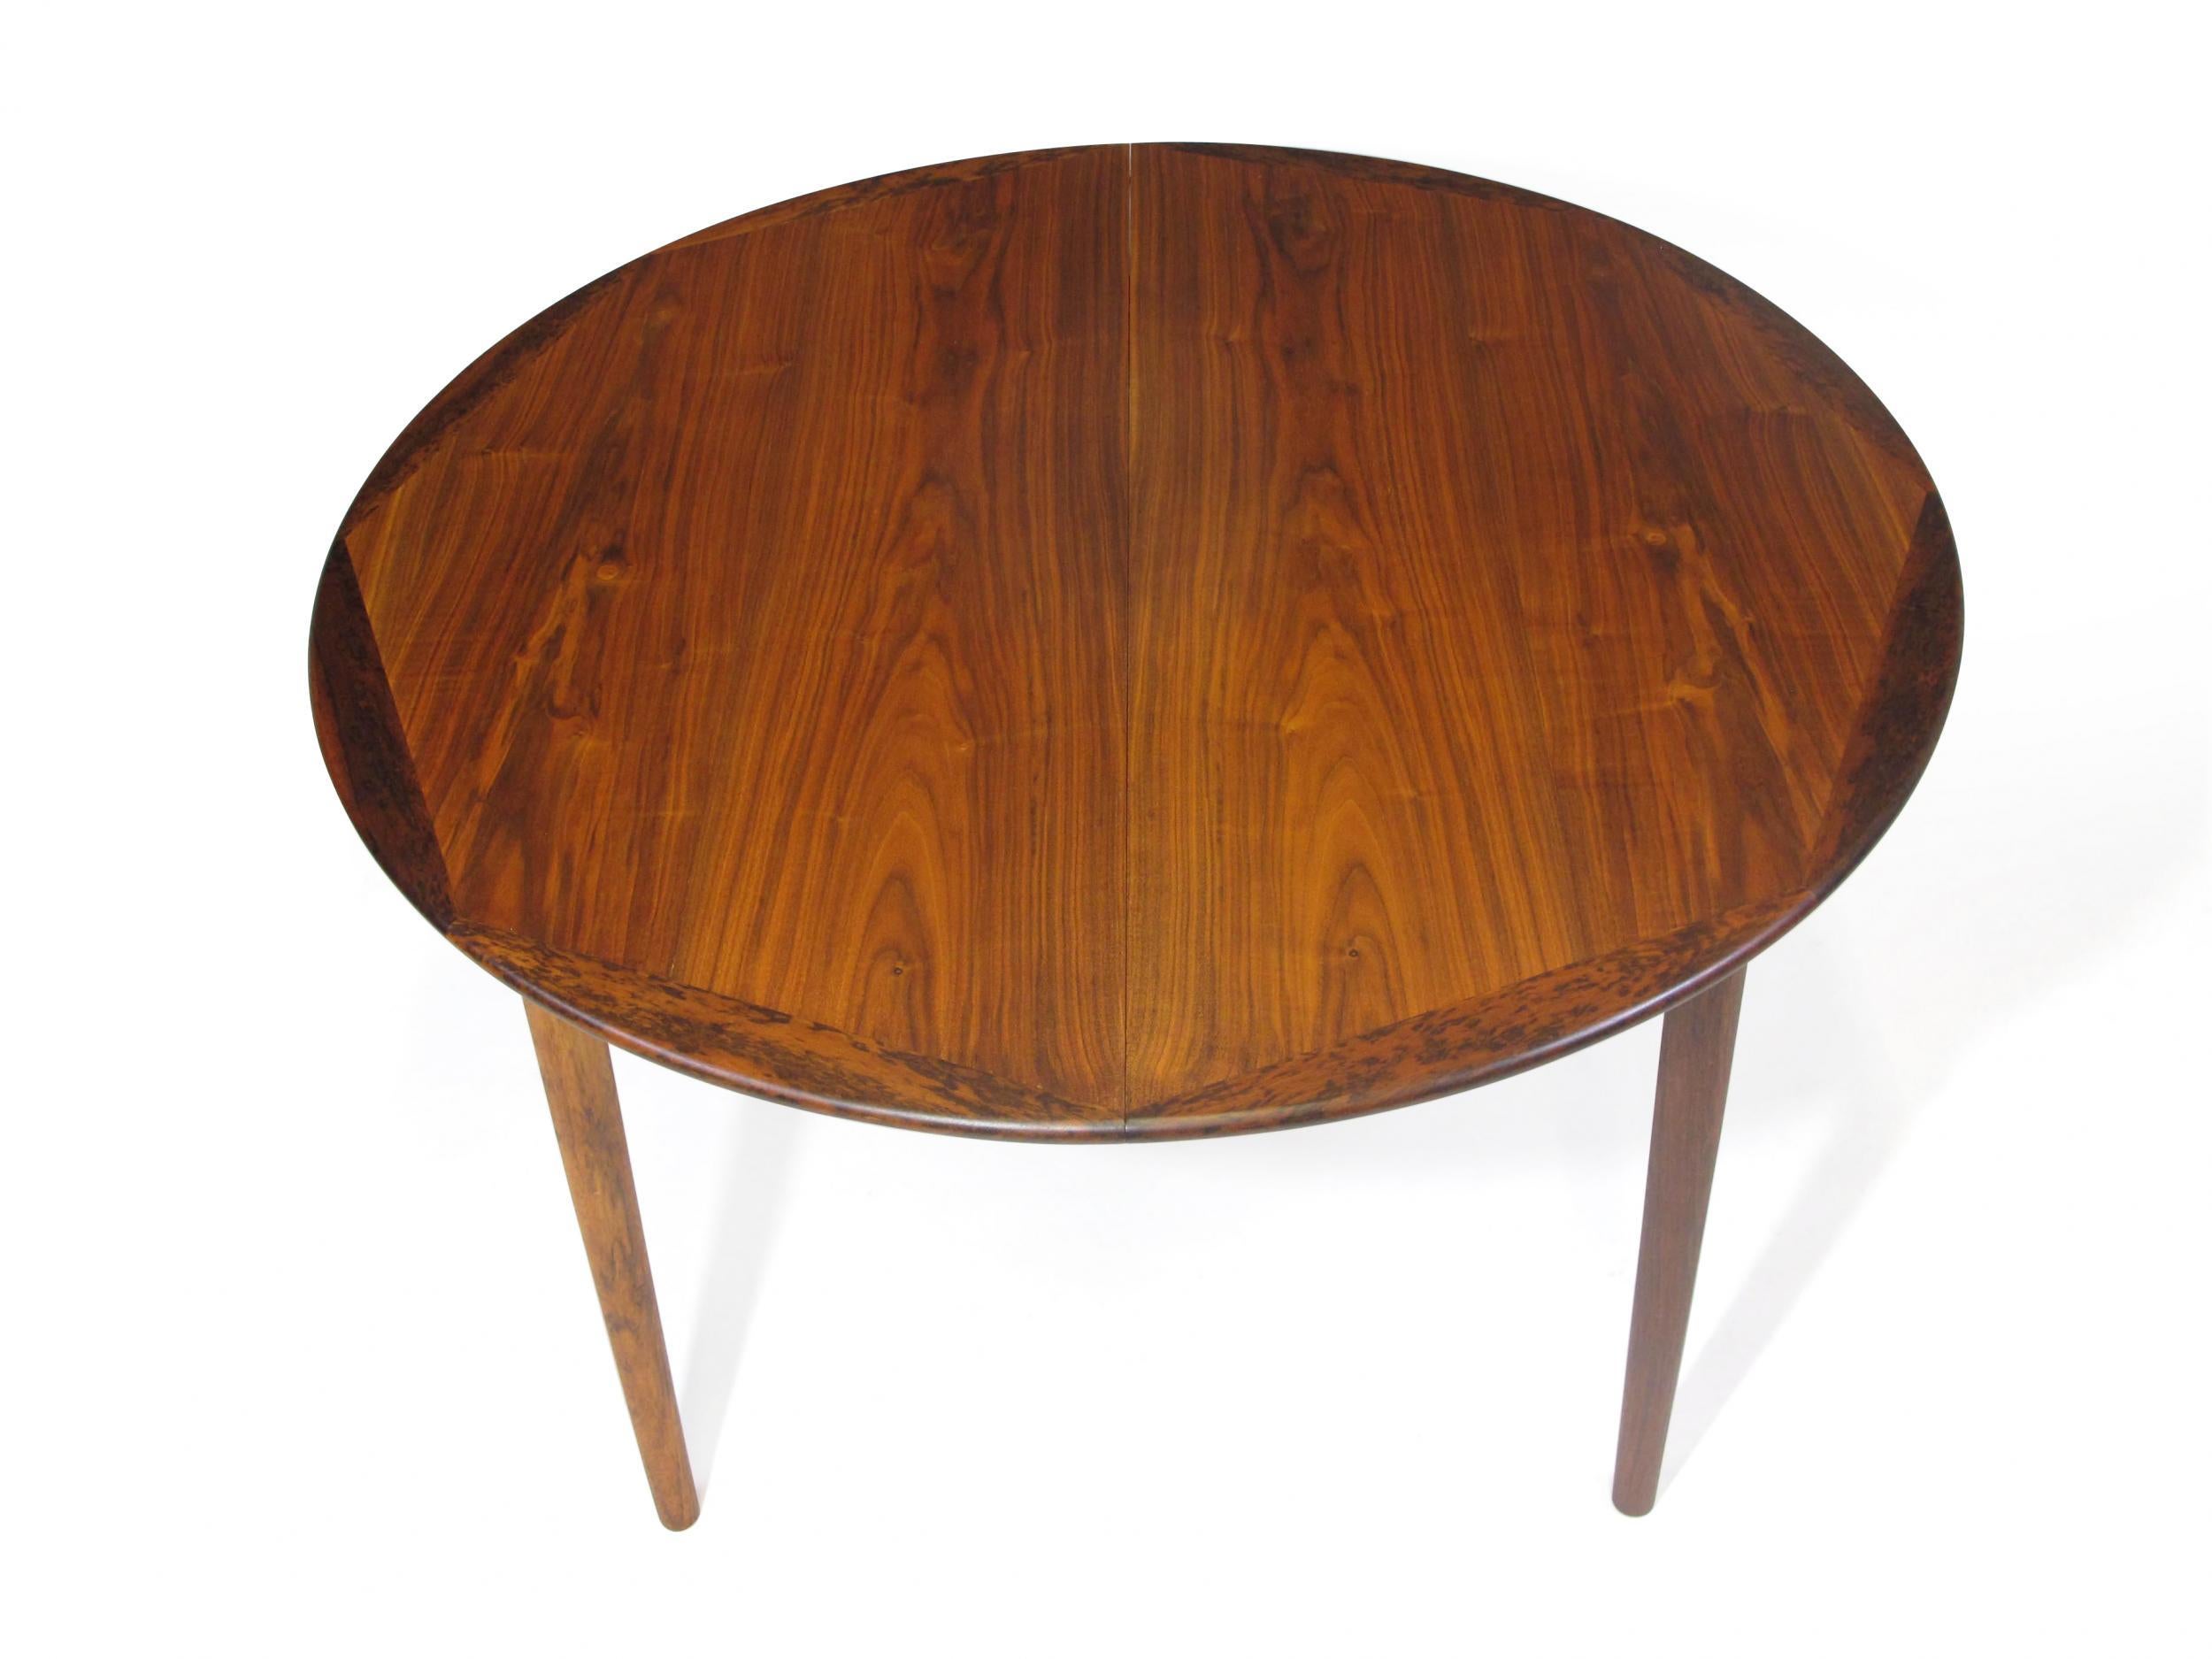 Round walnut dining table by Georg Petersens, circa 1960 Denmark. The table is crafted of walnut with solid walnut hexagon edge with one leaf. Finely restored by our in-house craftsman team, excellent condition with minor signs of age and use. Table